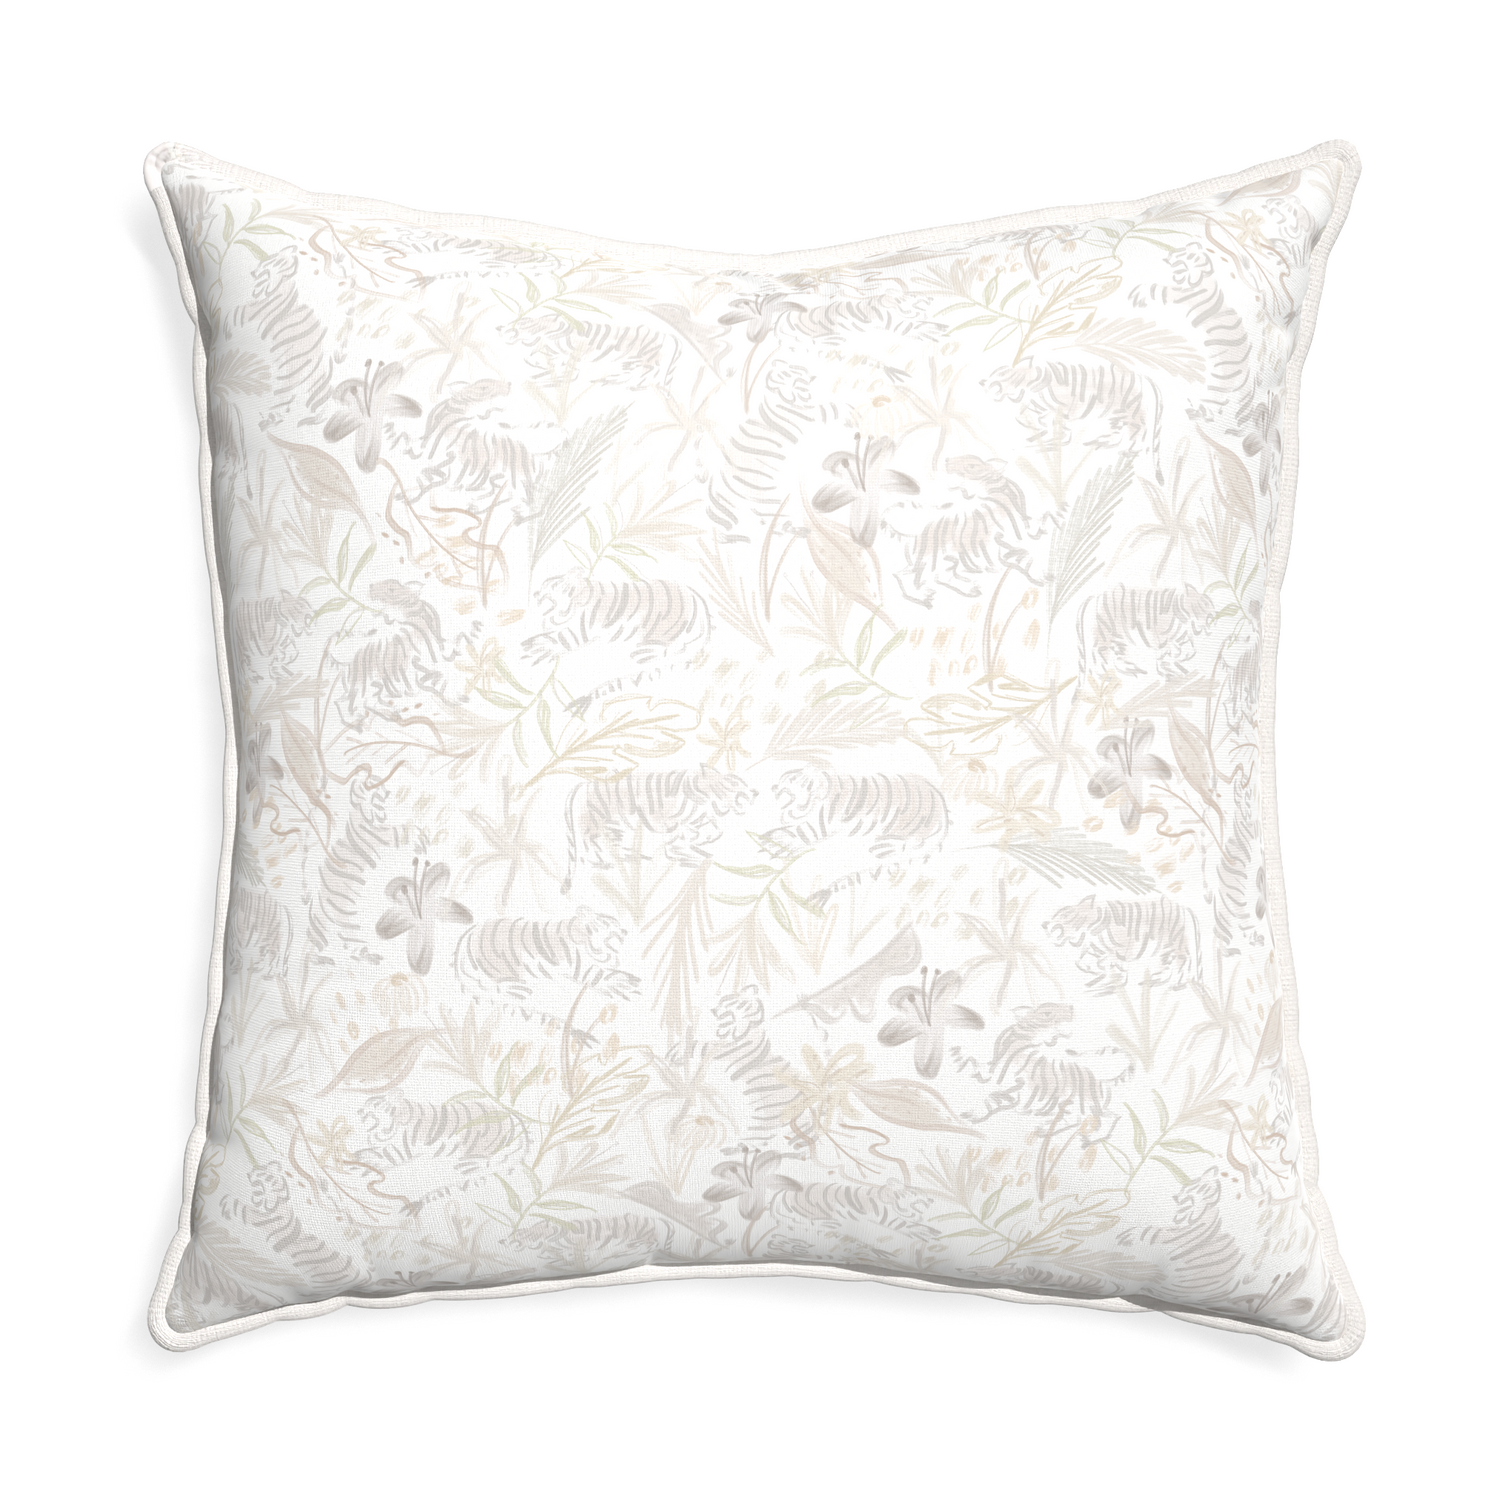 Euro-sham frida sand custom beige chinoiserie tigerpillow with snow piping on white background